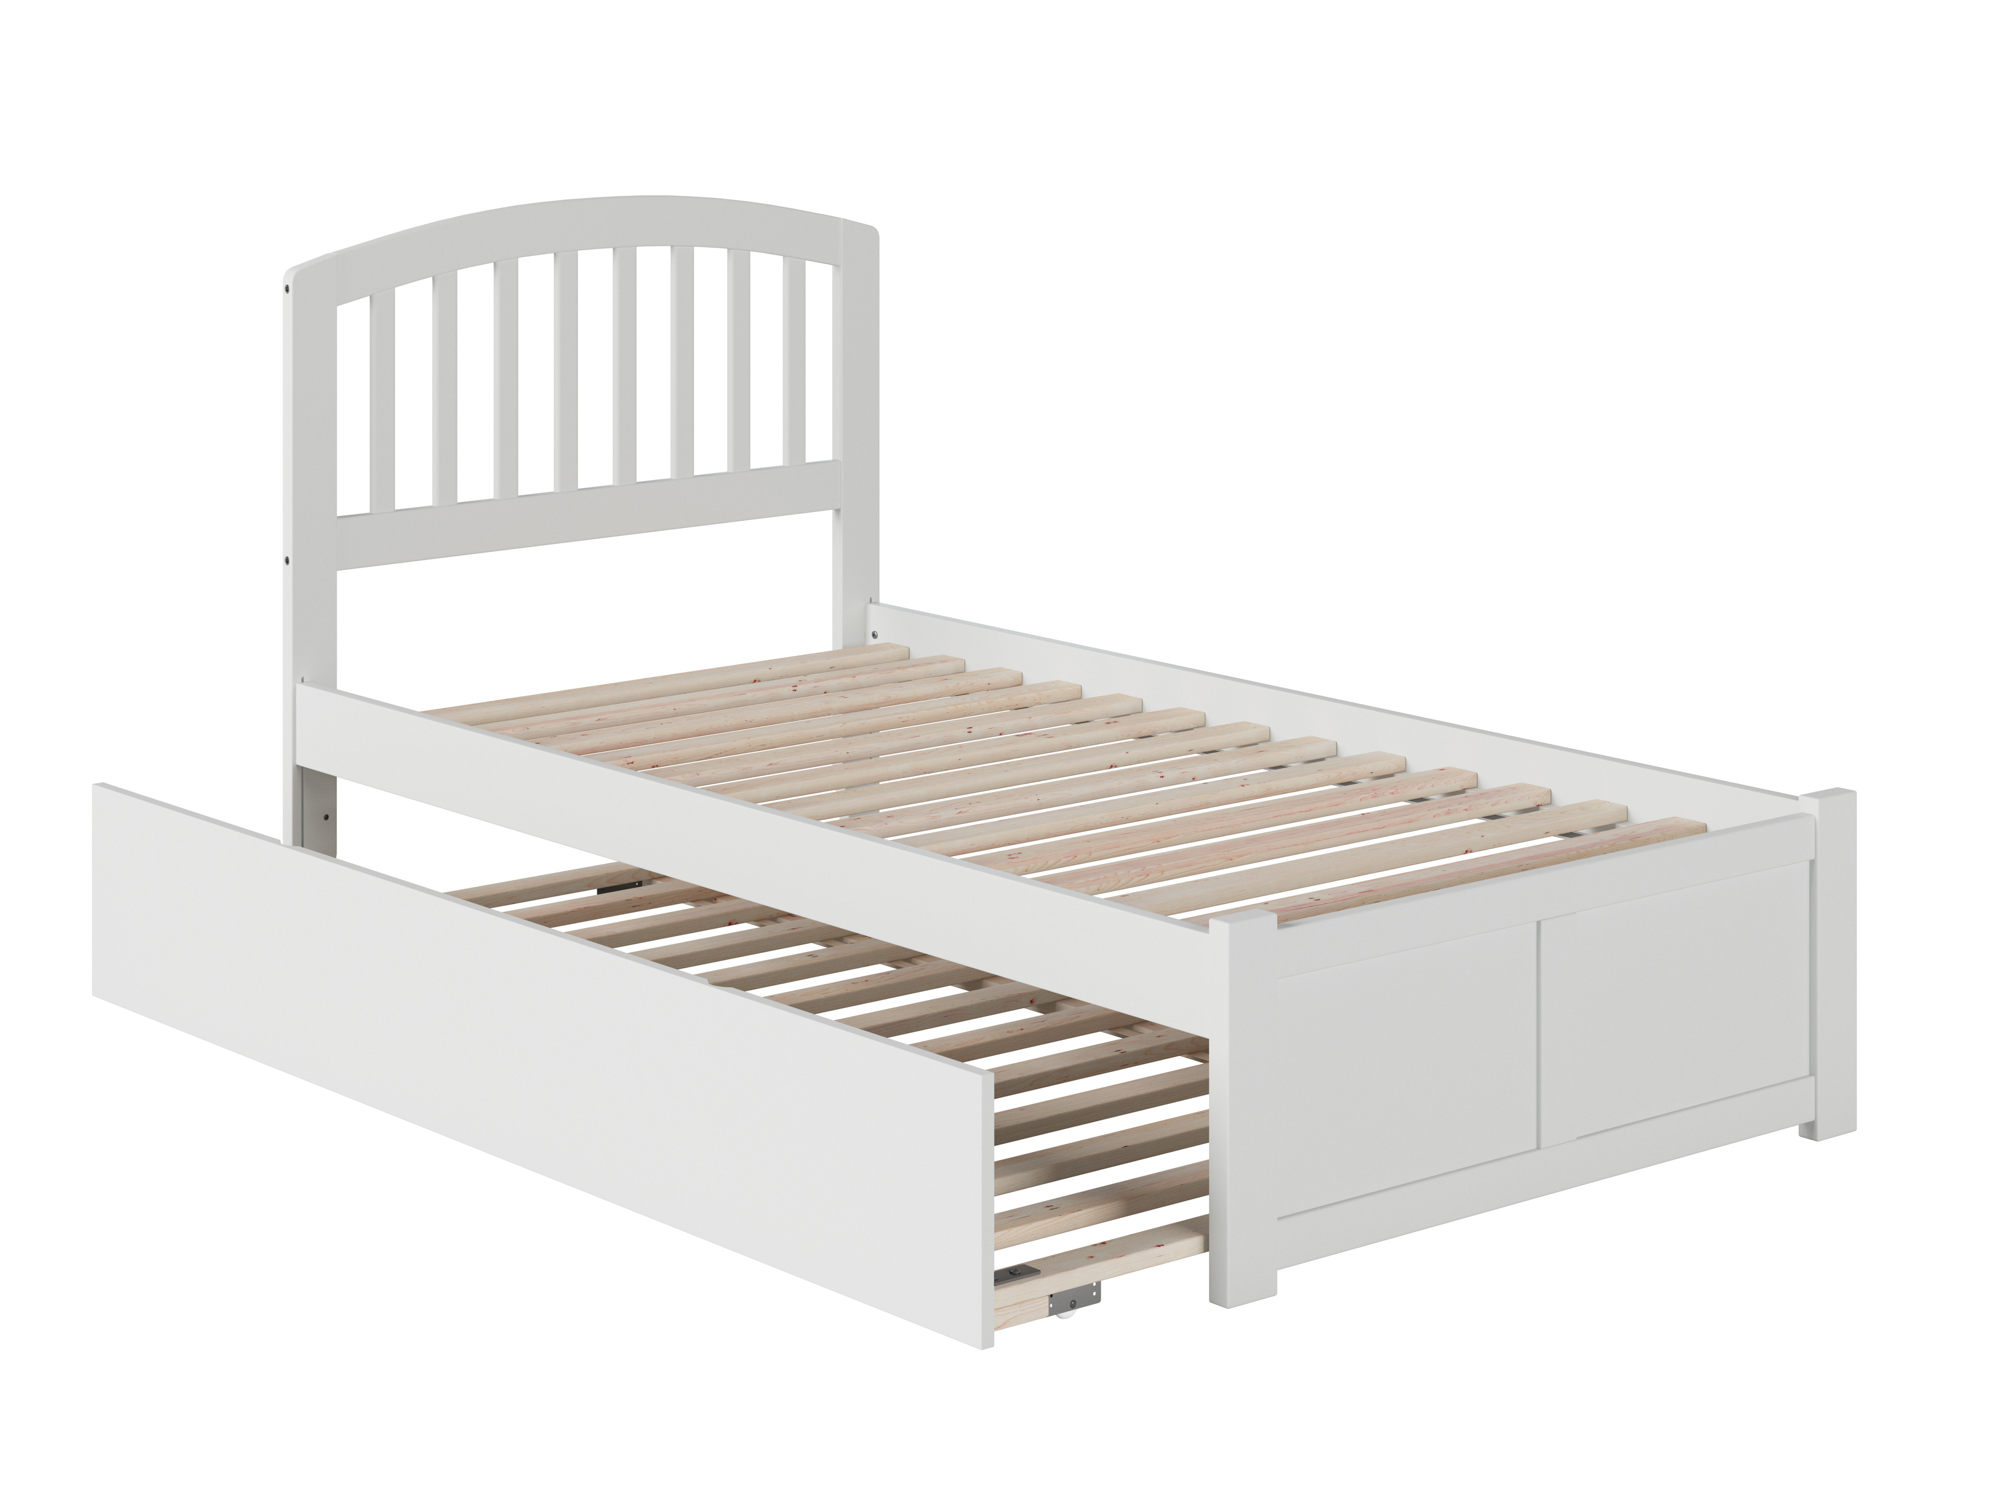 AFI Richmond Twin XL Solid Wood Bed with Twin XL Trundle in White - image 2 of 7